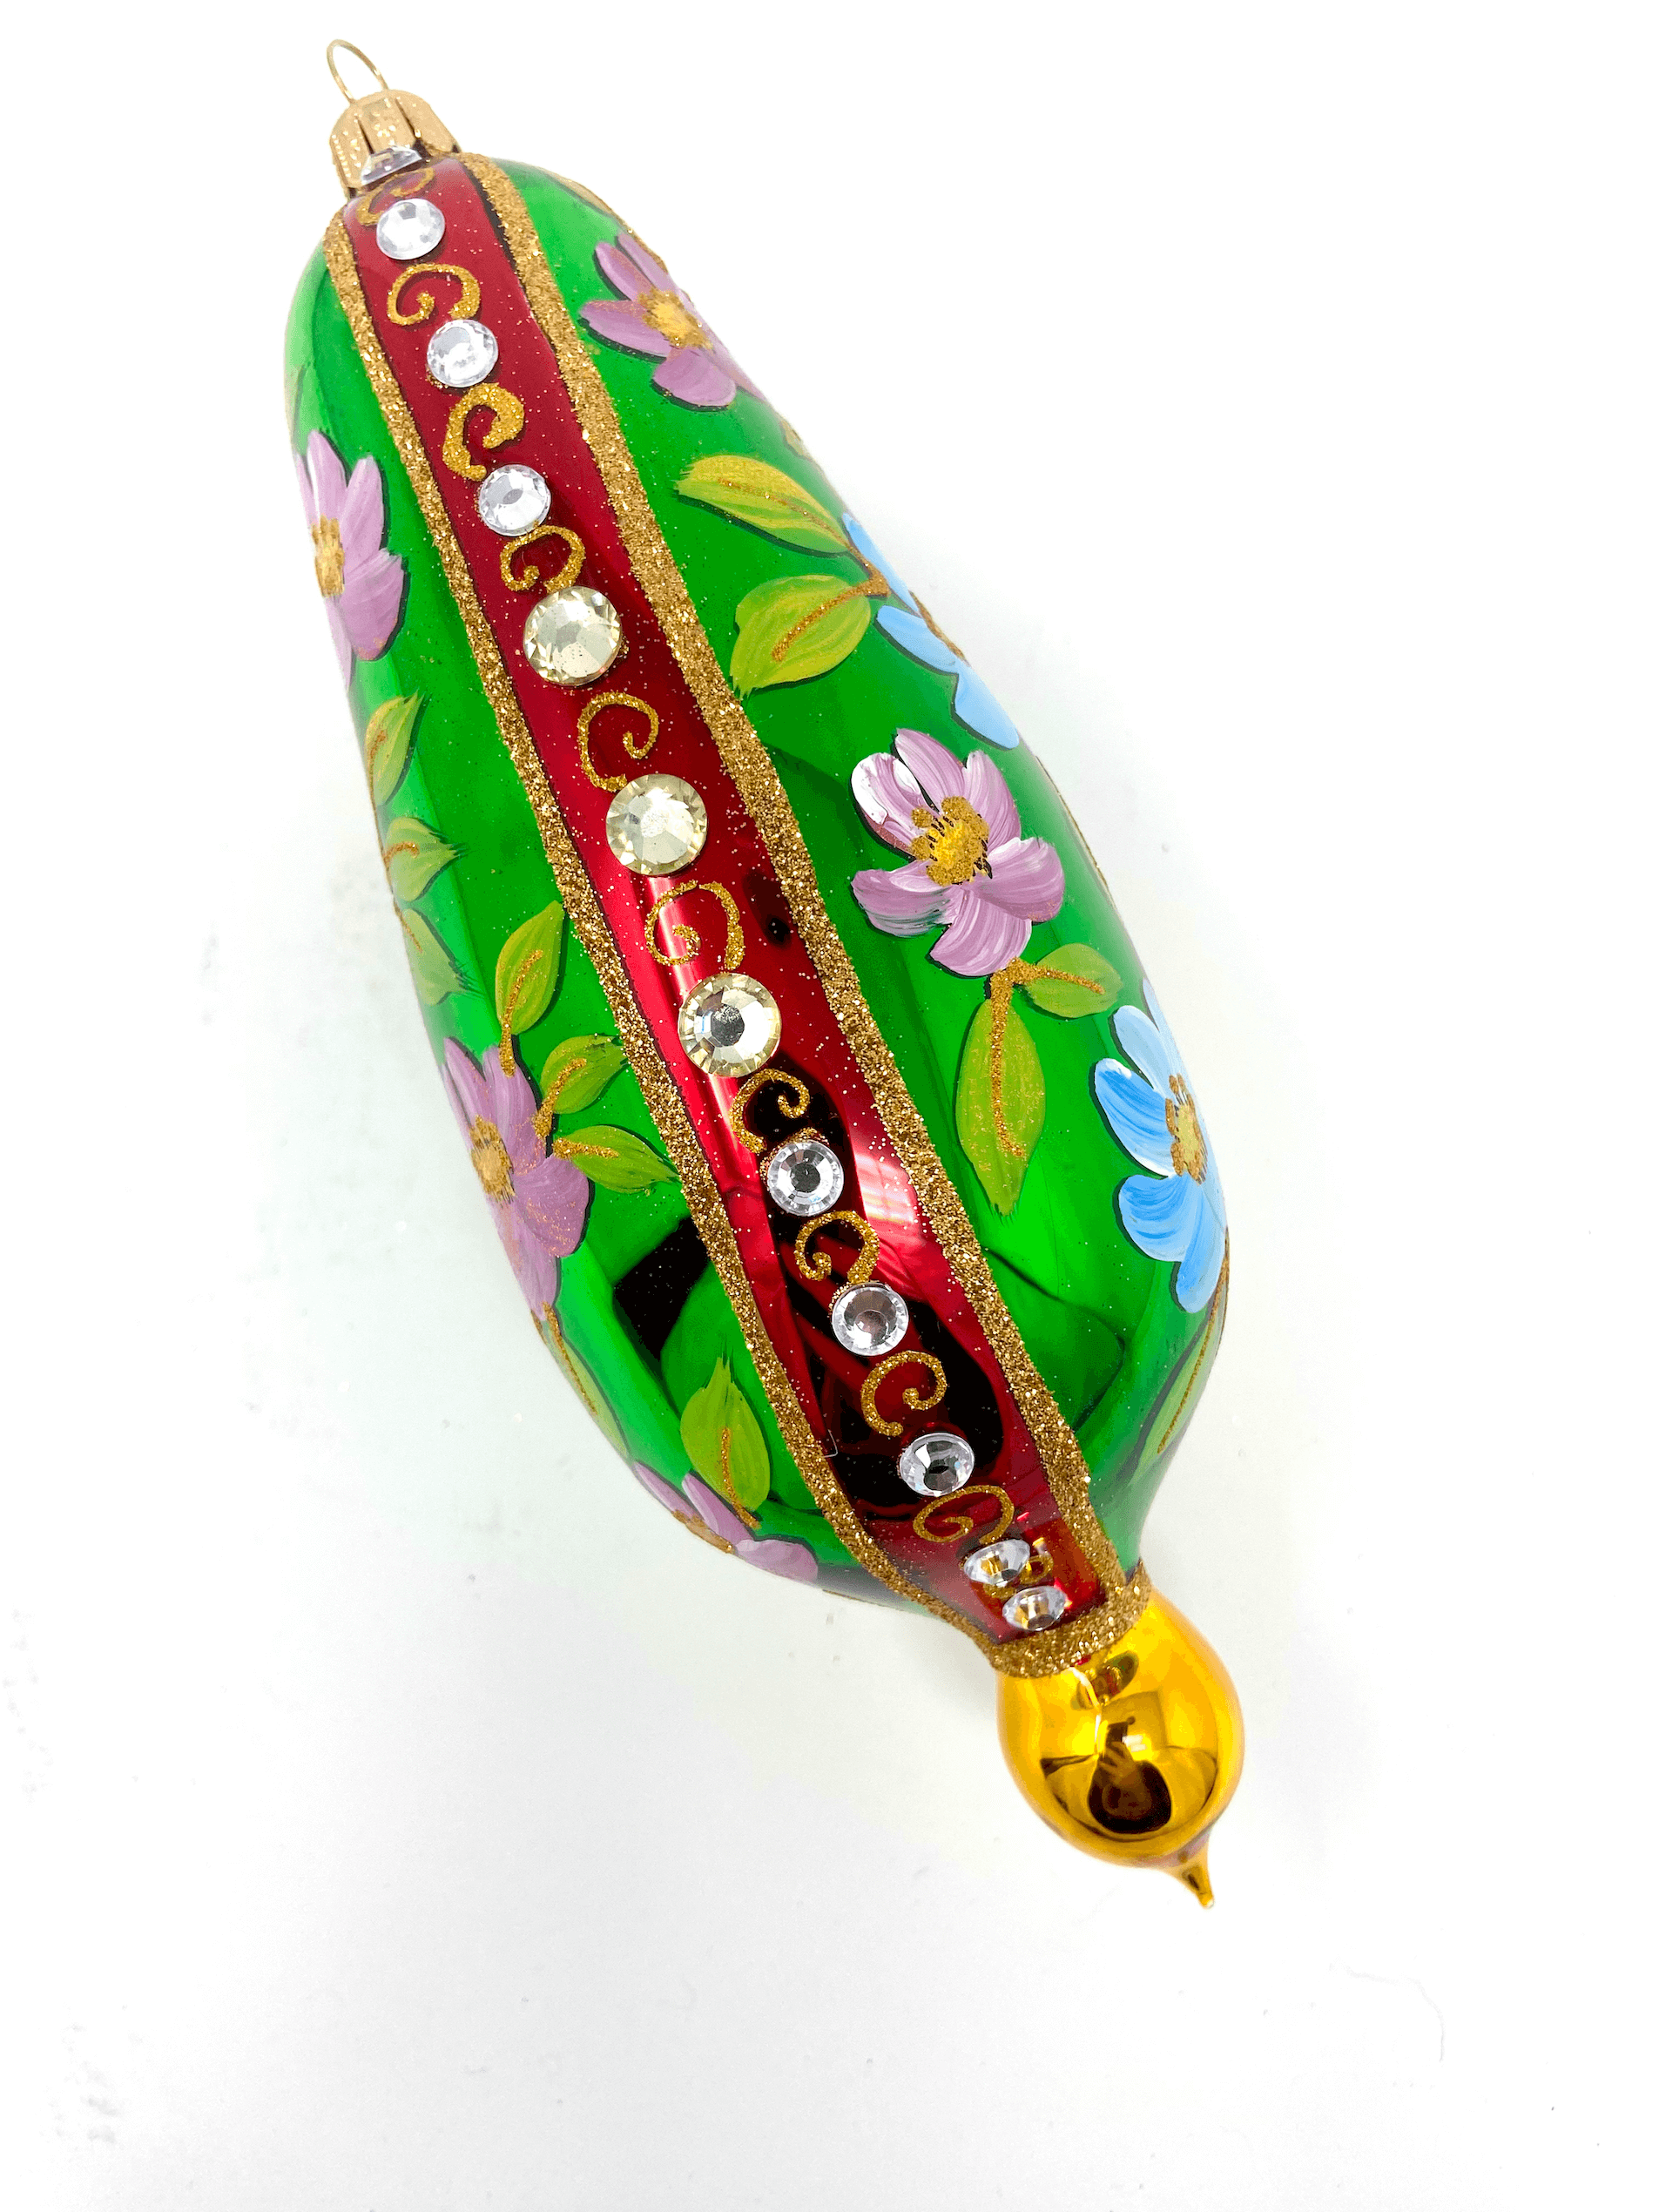 Green eggplant shaped ornament featuring gemstones, intricate gold detailing, and hand painted floral blooms. A Christmas polish glass ornament. Floral Escape Floral Fetish.